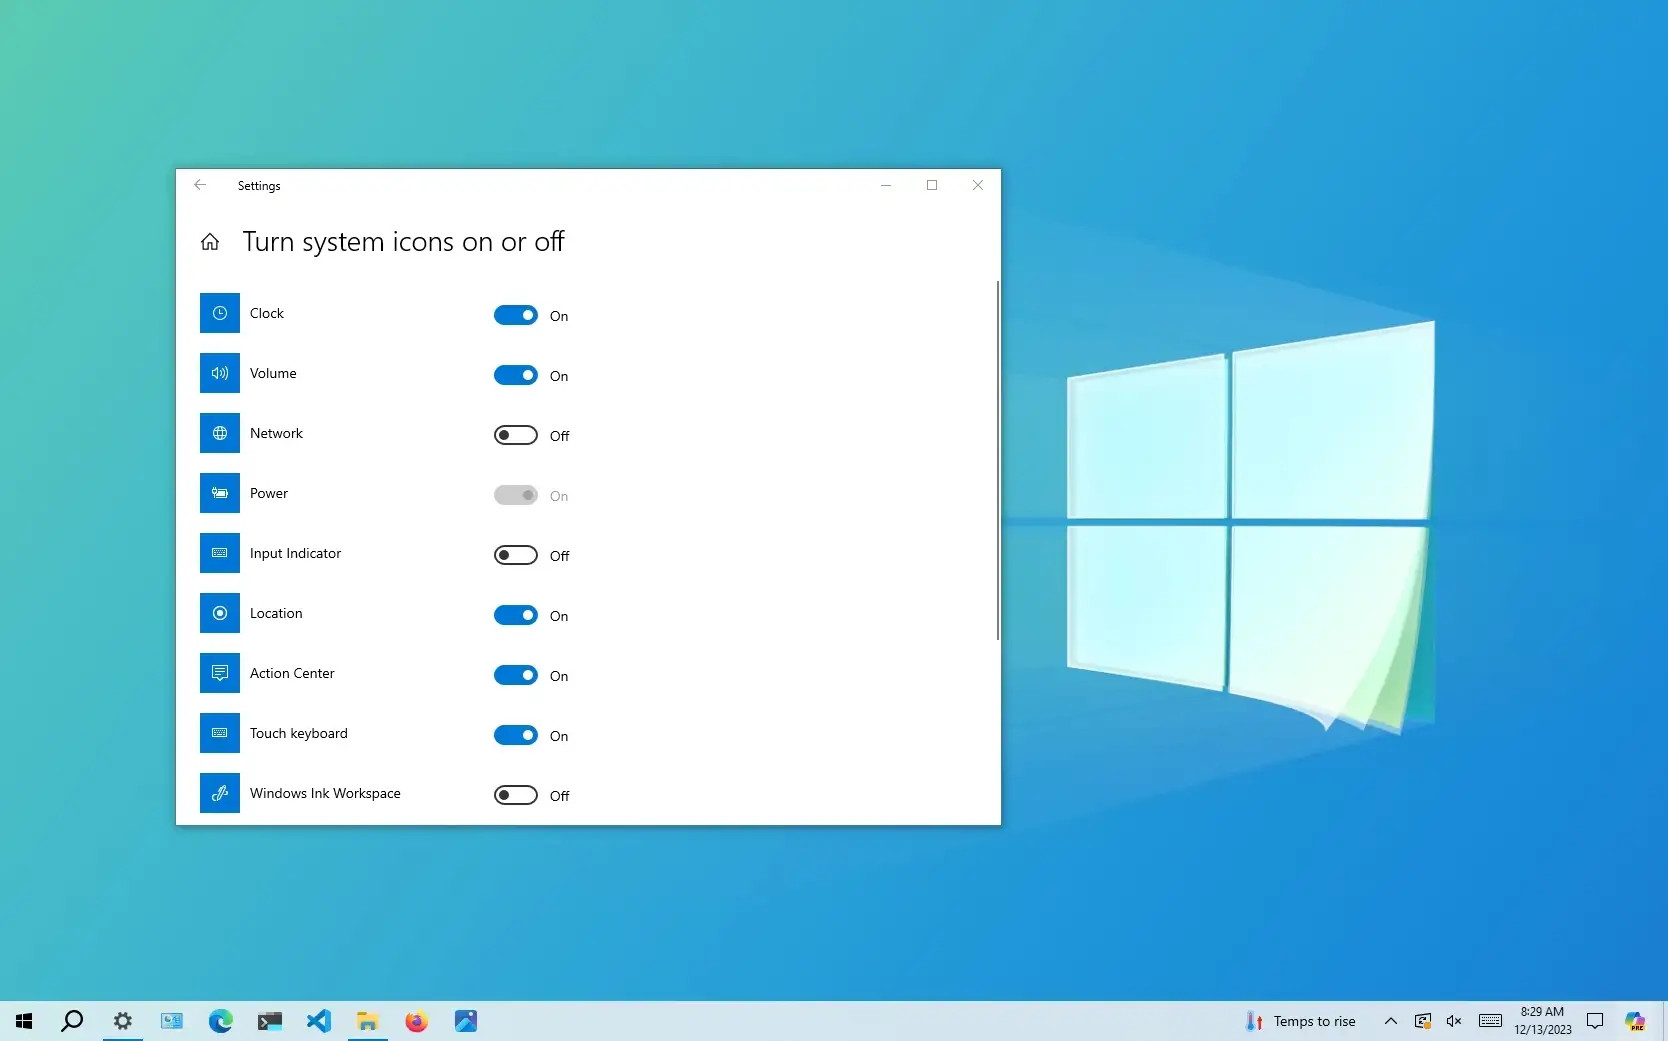 How to Customize System Tray Icons on Windows 10